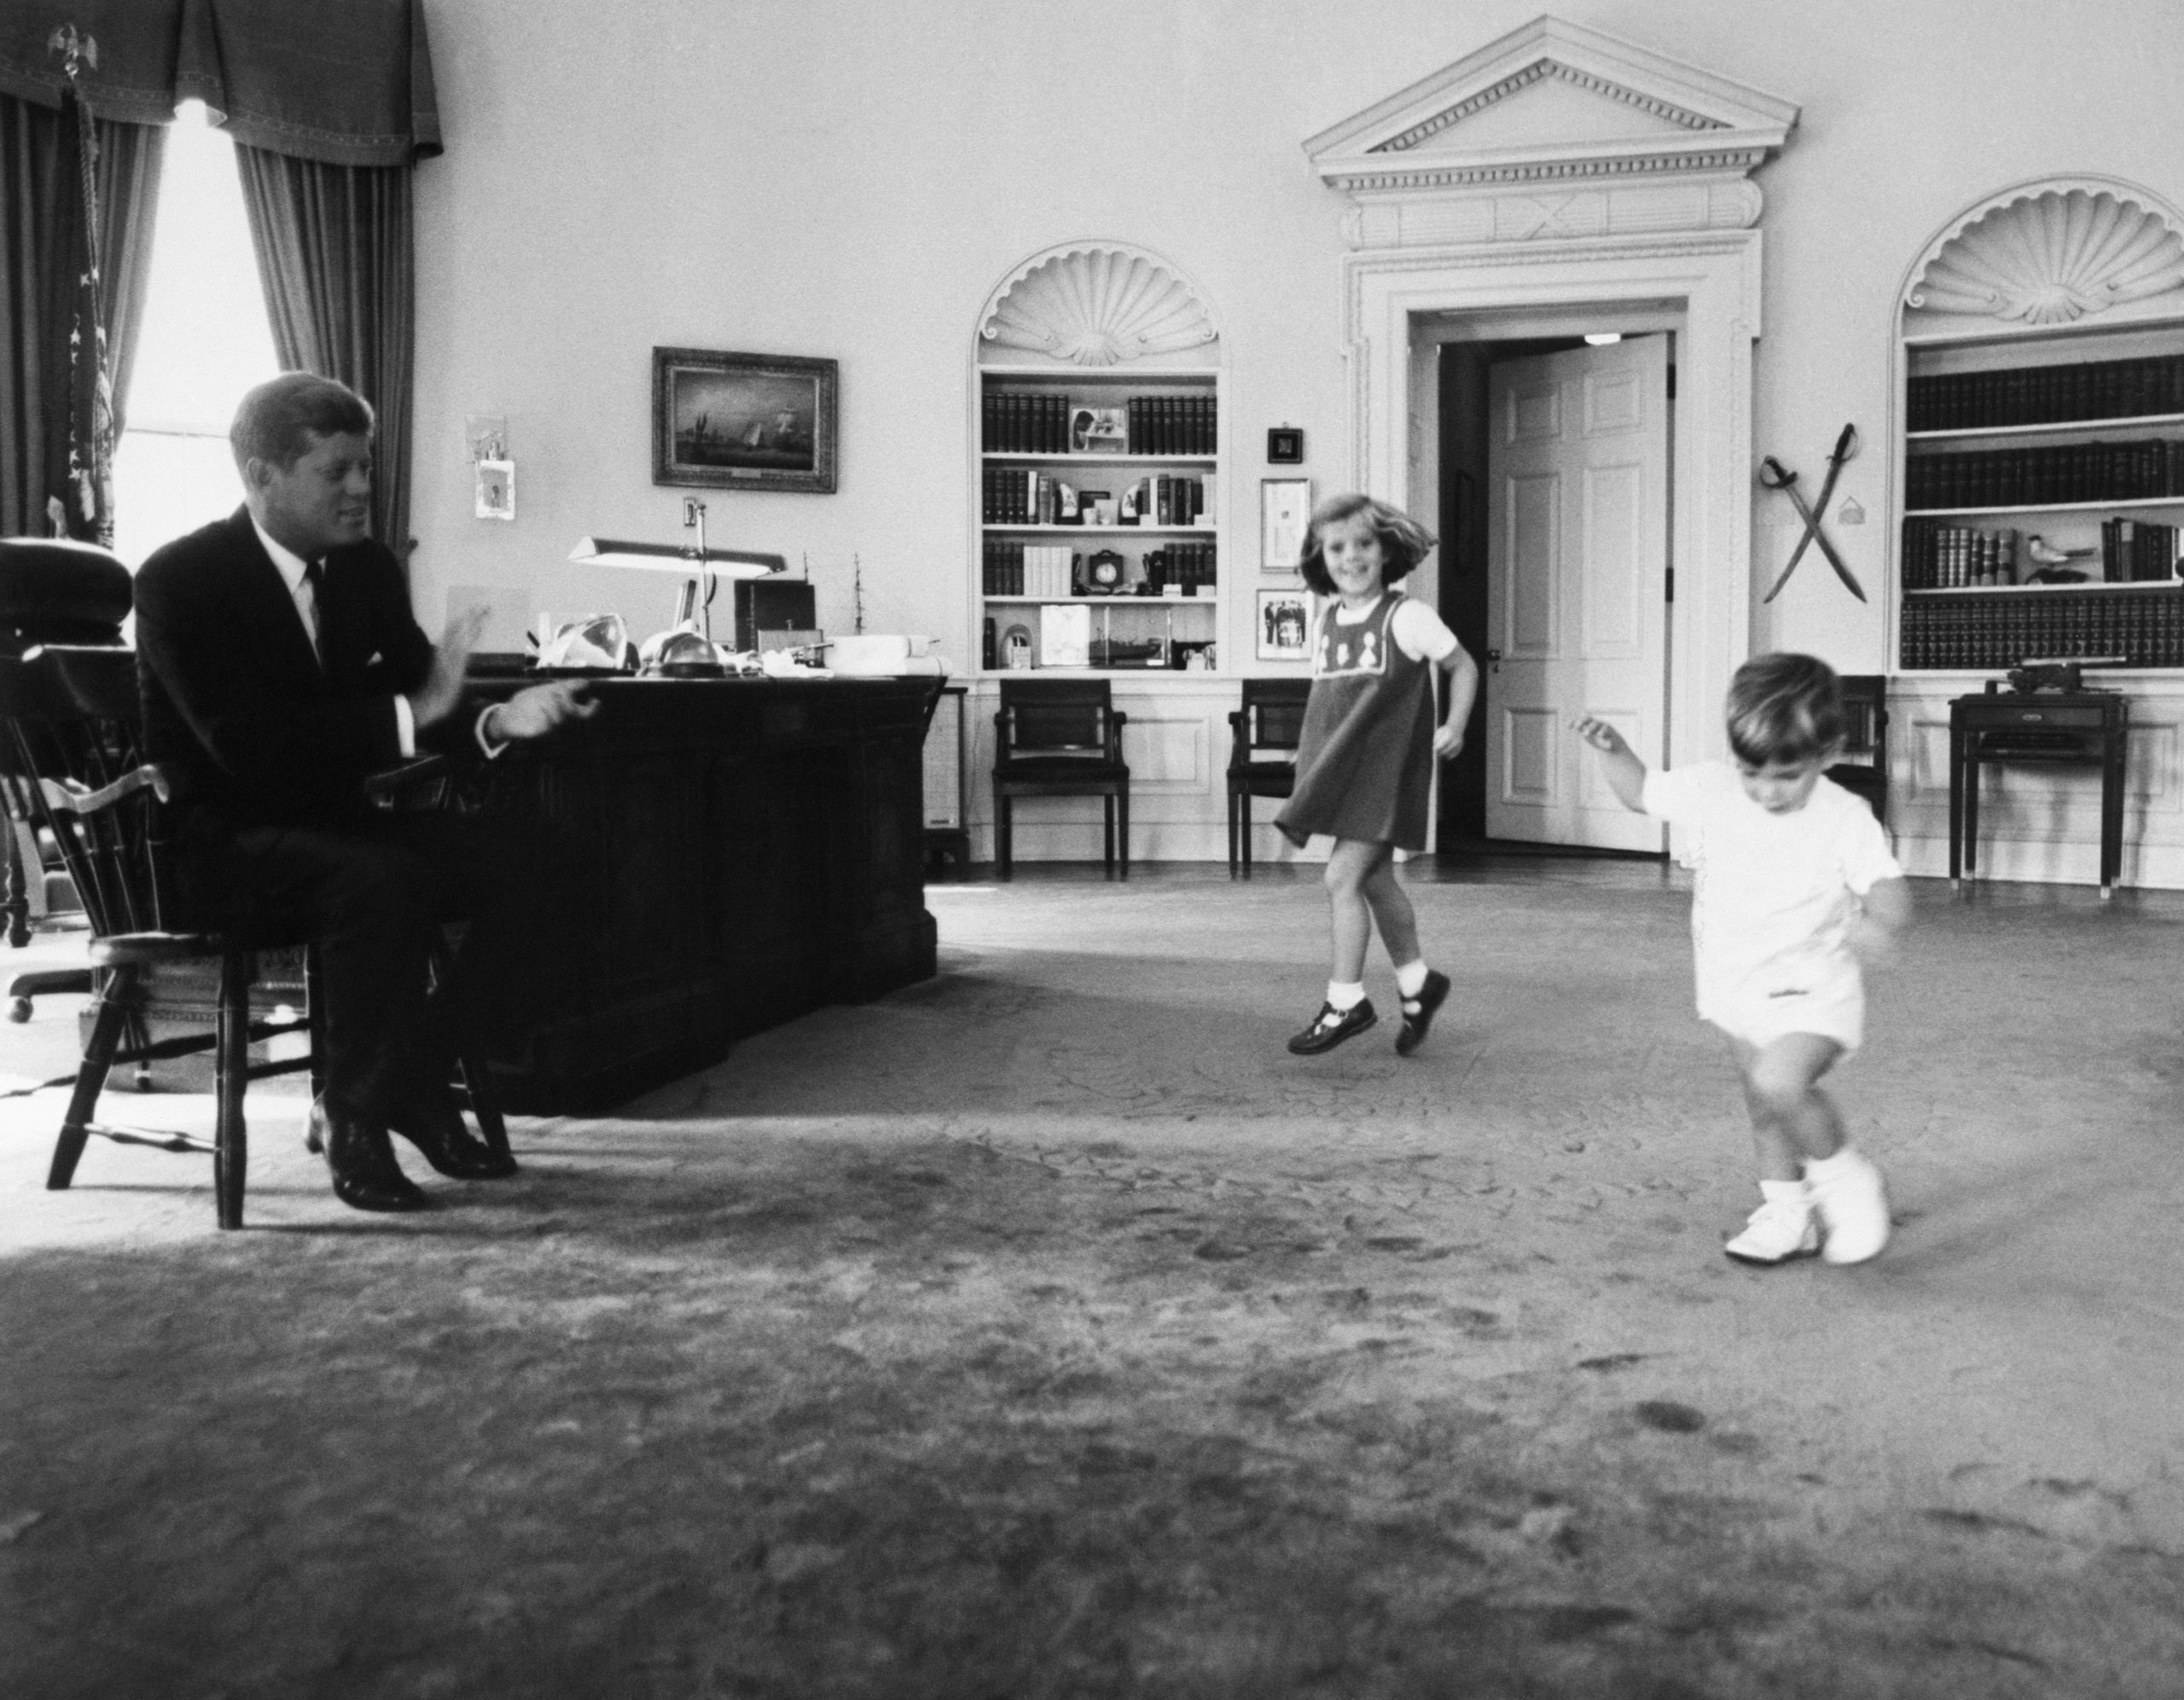 John F. Kennedy: J.F.K. claps while his daughter Caroline and son John Jr. dance in the Oval Office in 1962. John Jr. was a magazine publisher, an assistant district attorney and a staple of the social pages and tabloids until his untimely death in a plane crash in 1999. Caroline has devoted her life to writing and philanthropy. More recently, she served as U.S. Ambassador to Japan under President Barack Obama.